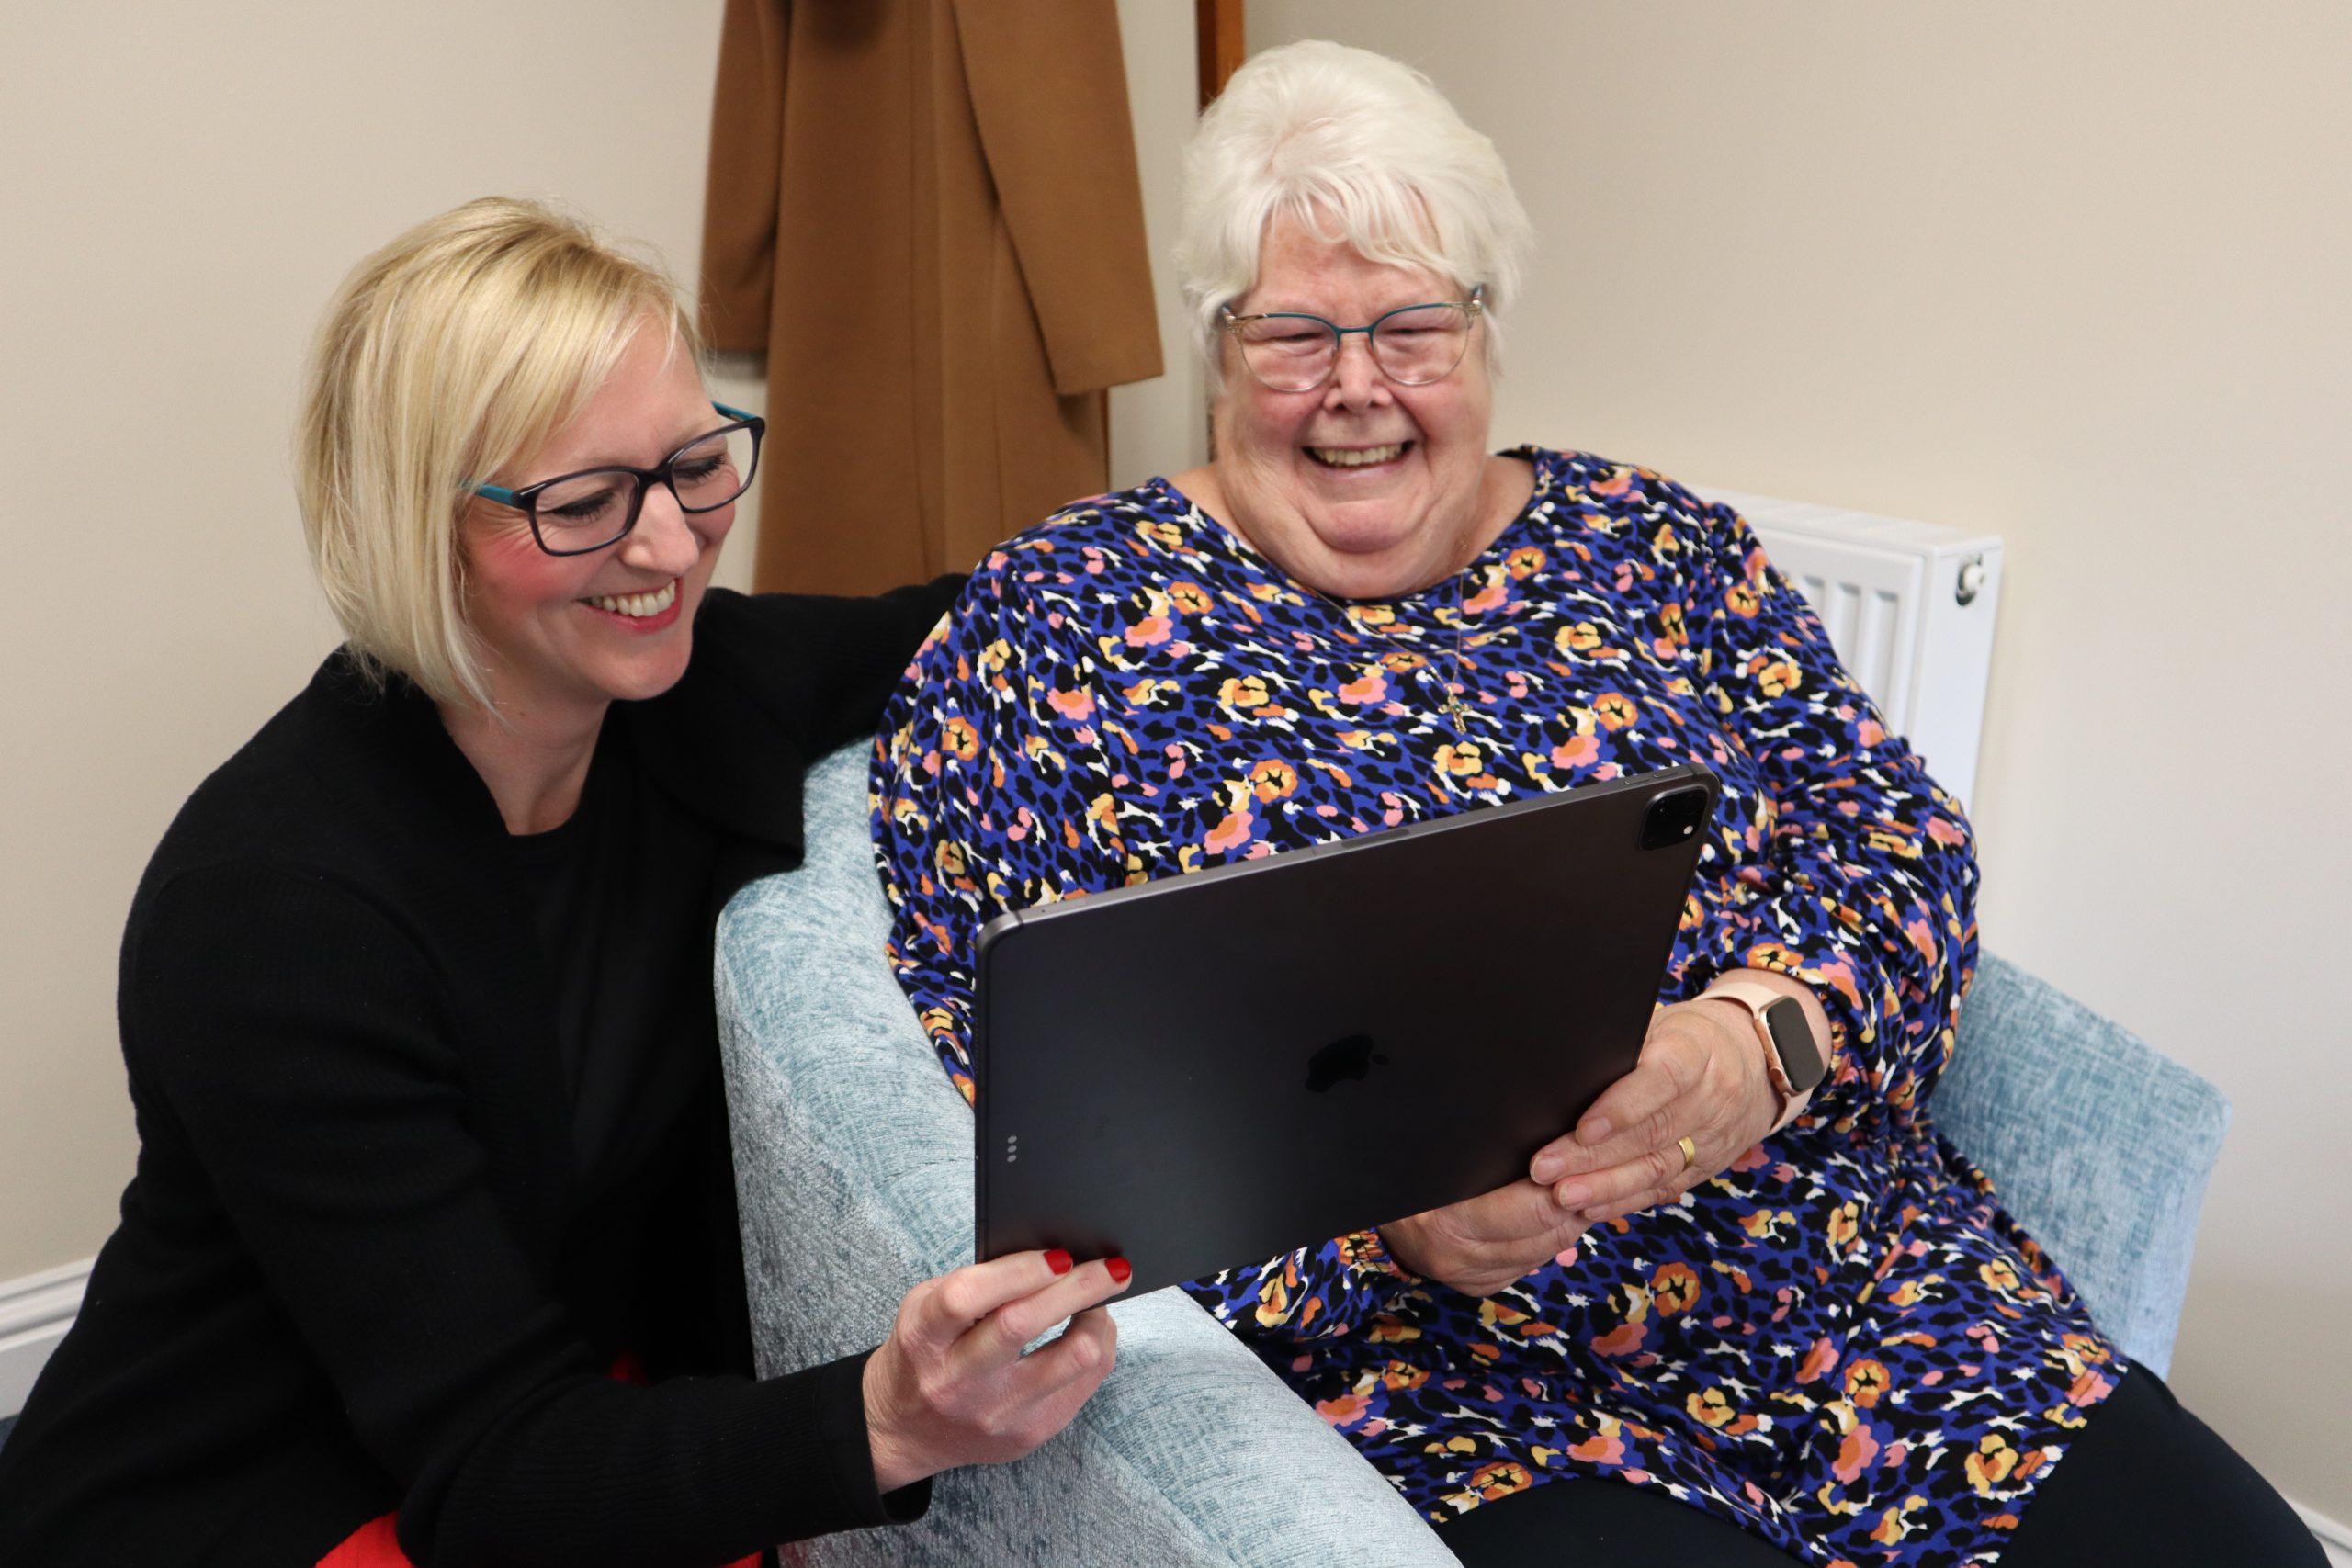 Older person being supported to learn technology